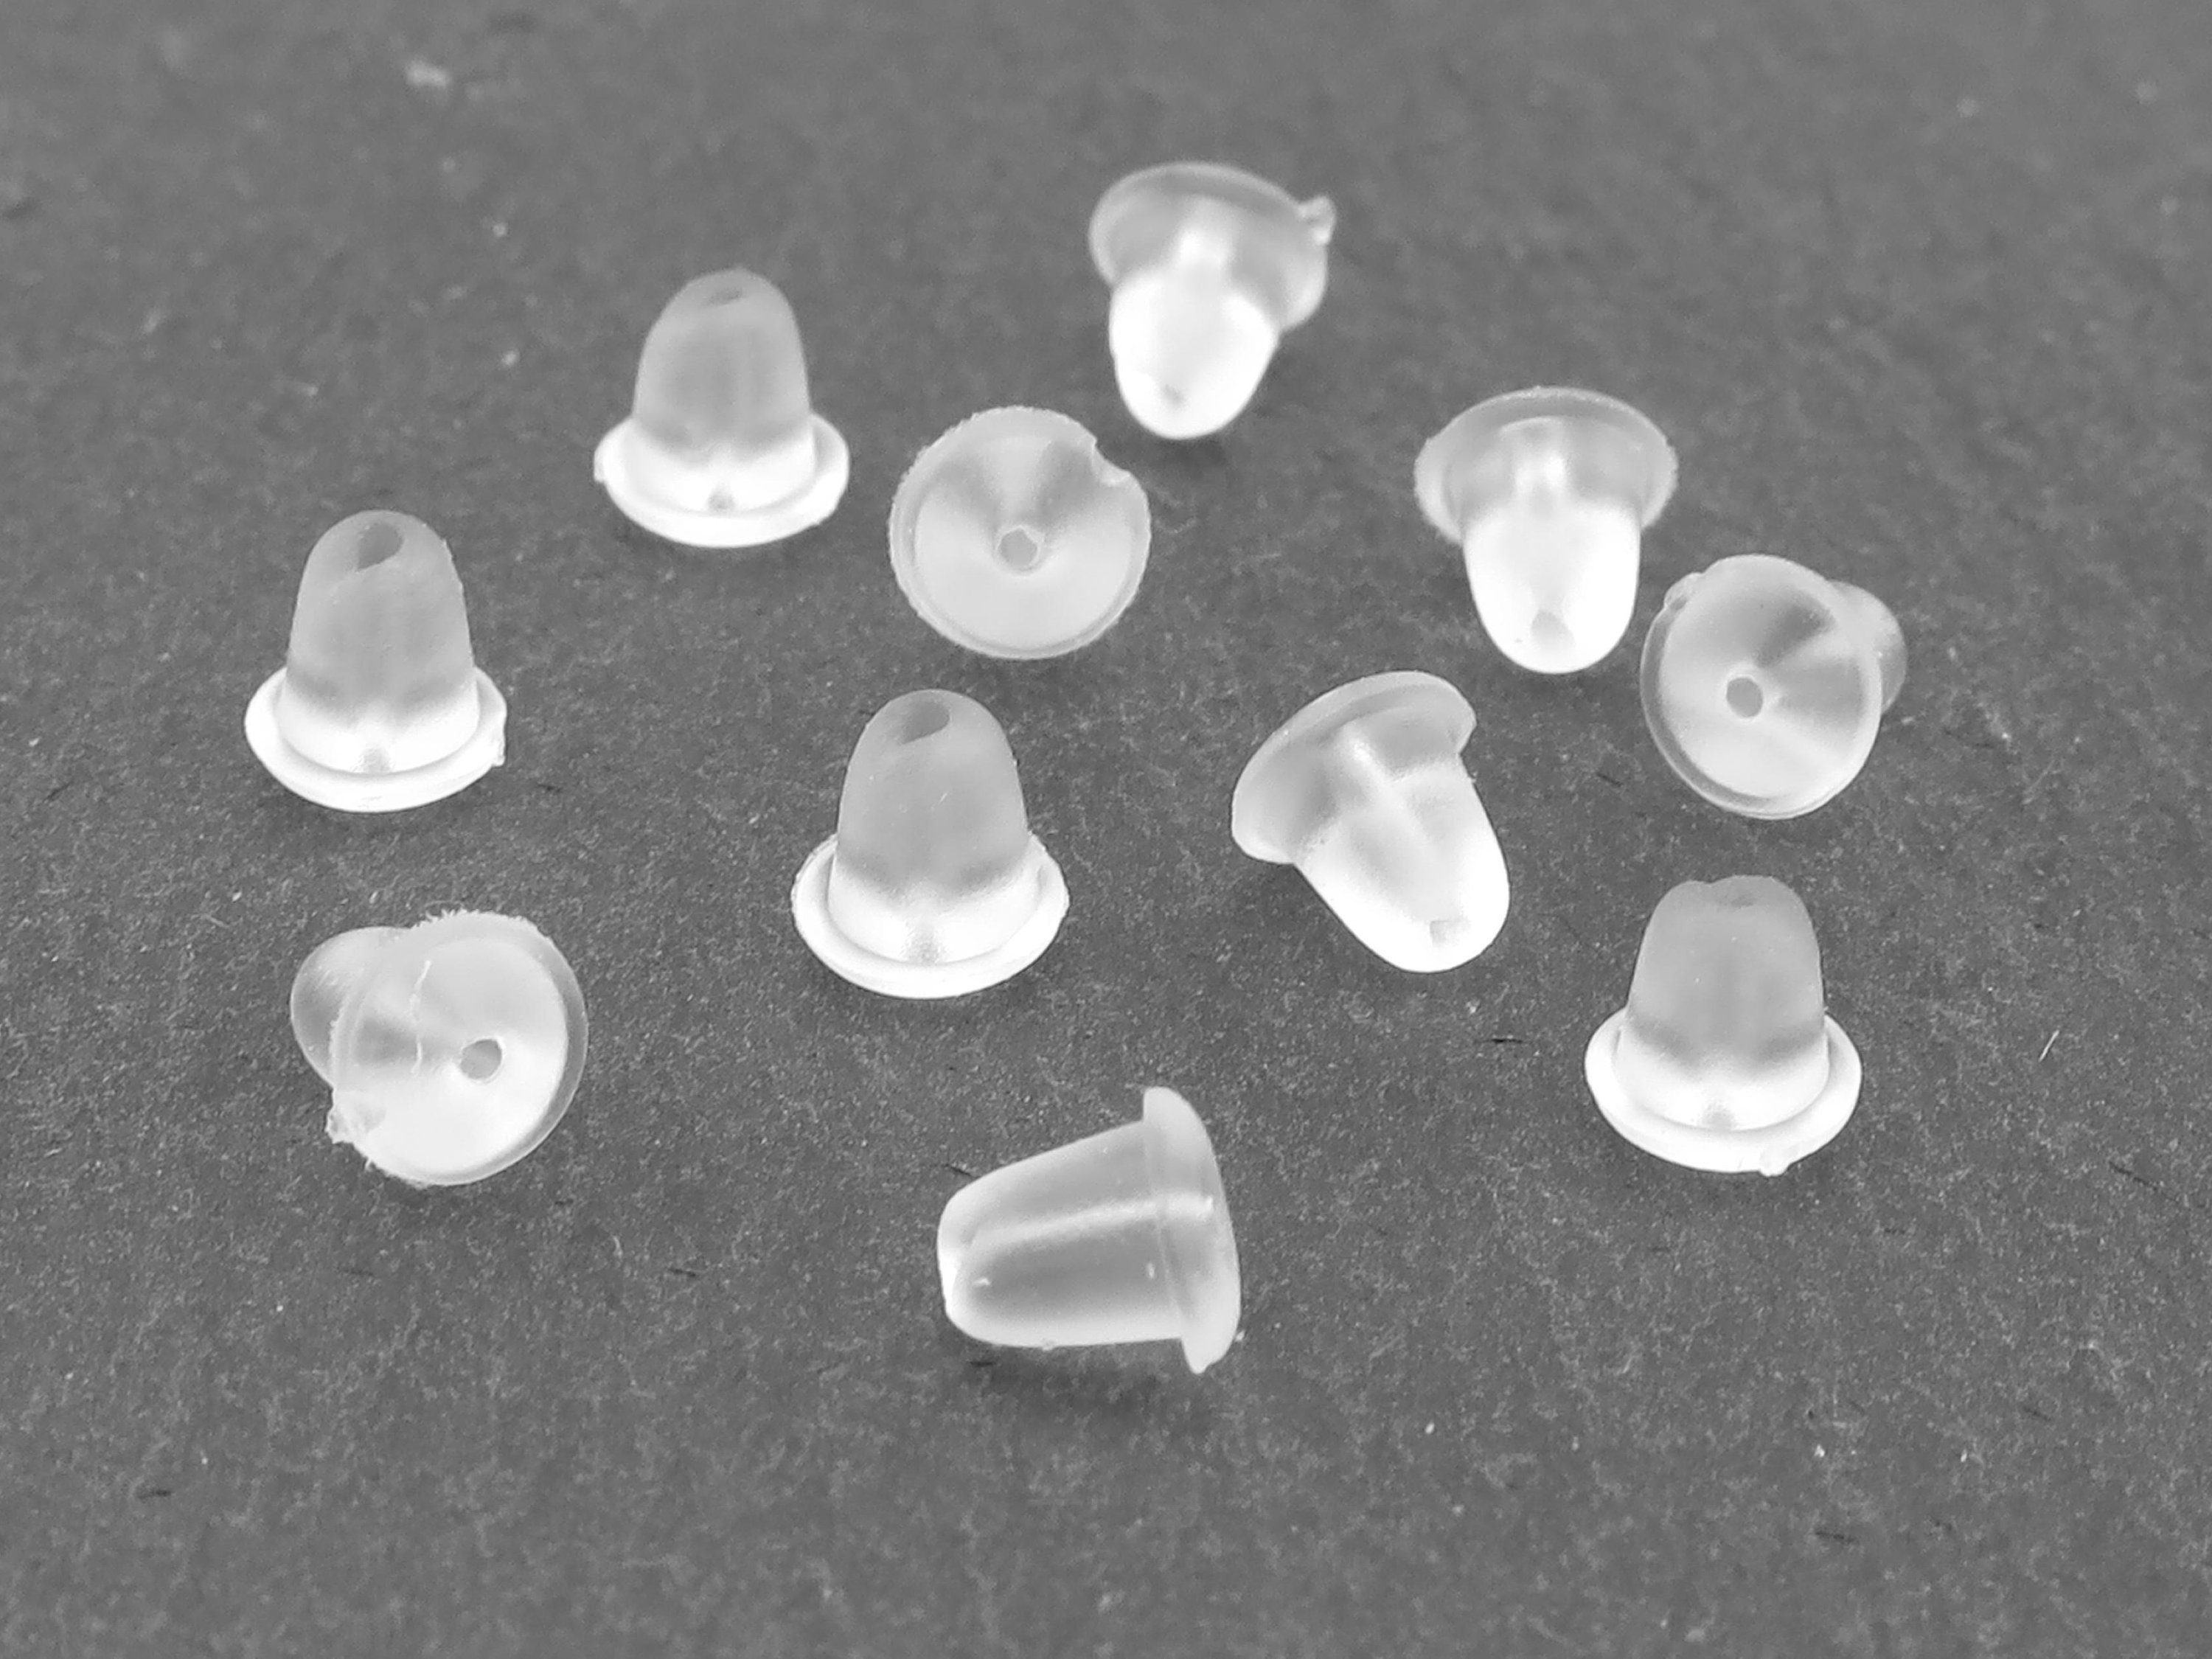 100 X Soft Plastic Replacement Earring Backs Tube Back Stoppers Earnuts 